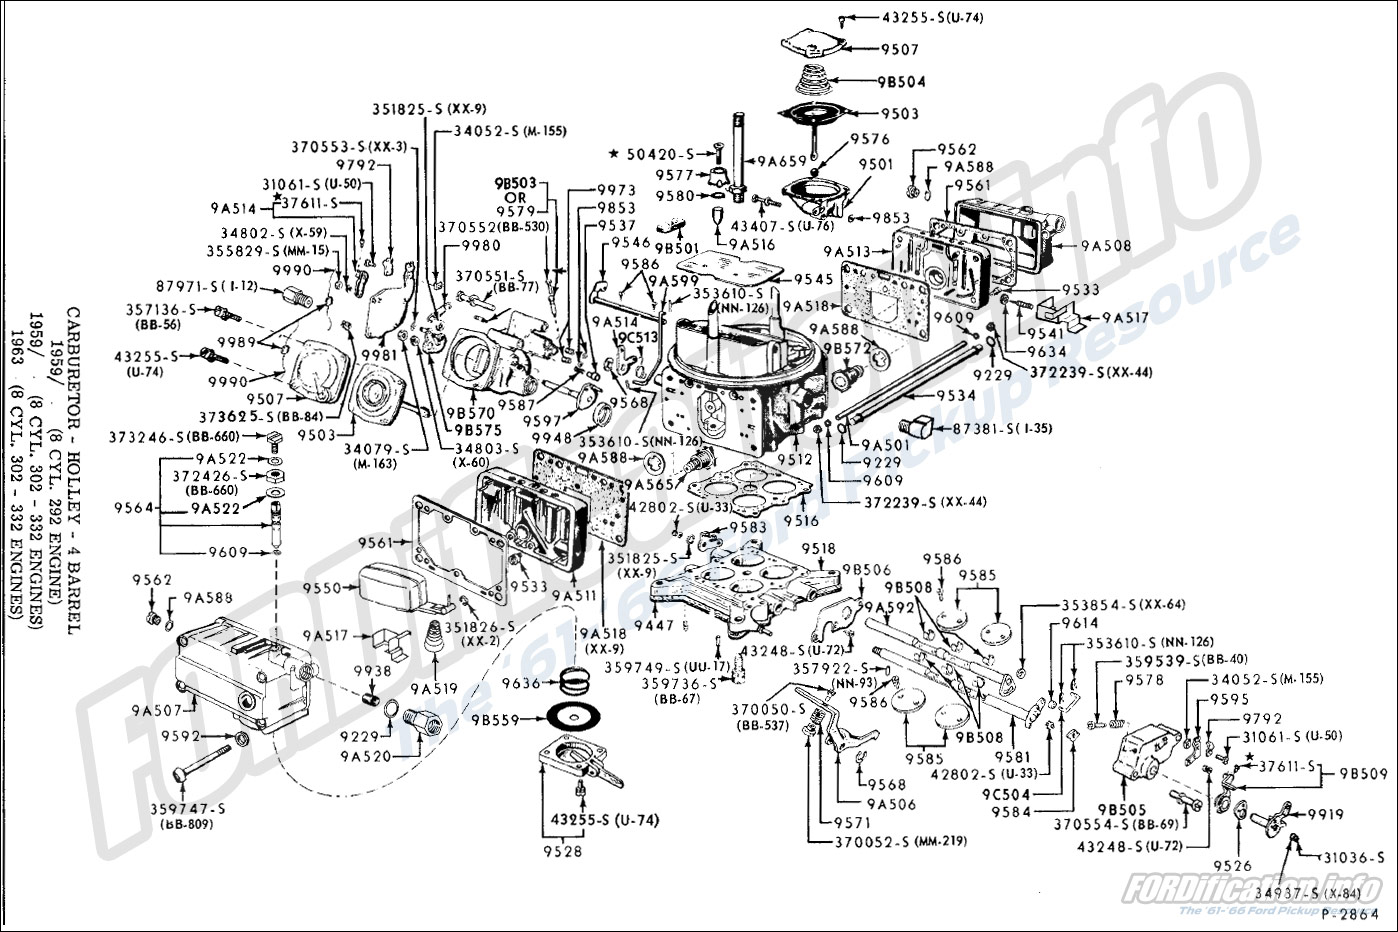 Engine-related Schematics - FORDification.info - The '61-'66 Ford